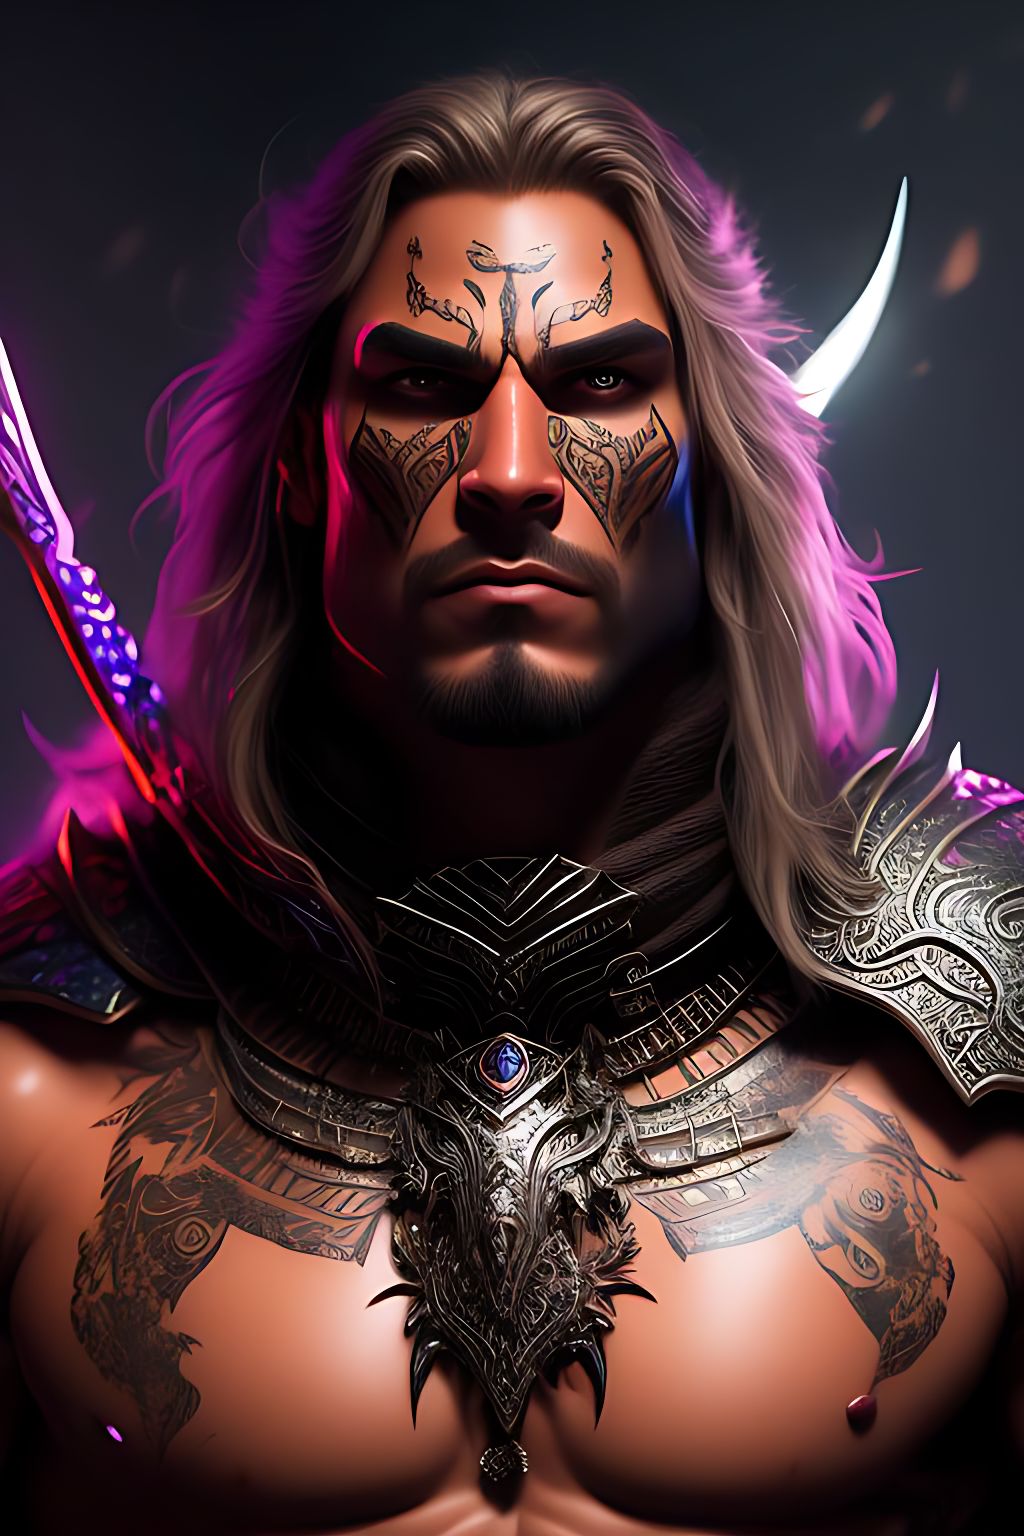 an imposing warrior, with tribal tattoos on his face /  silver armor / bright Eyes/ highlights / fur scarf/ he-man/ super detailed/ warcraft, Lightning, moonlight, apple orchard, purple, black, Green, Blue, White, Fog, lighting strike in background, Terrifying, Grotesque, disgusting, Haunting, menacing, Fine details, Intricate details, Studio photo, Rich color, Sensual, Fantasy, Photorealistic, Ultra detailed, Vibrant lighting, Realistic textures, Hyperrealistic, Shine